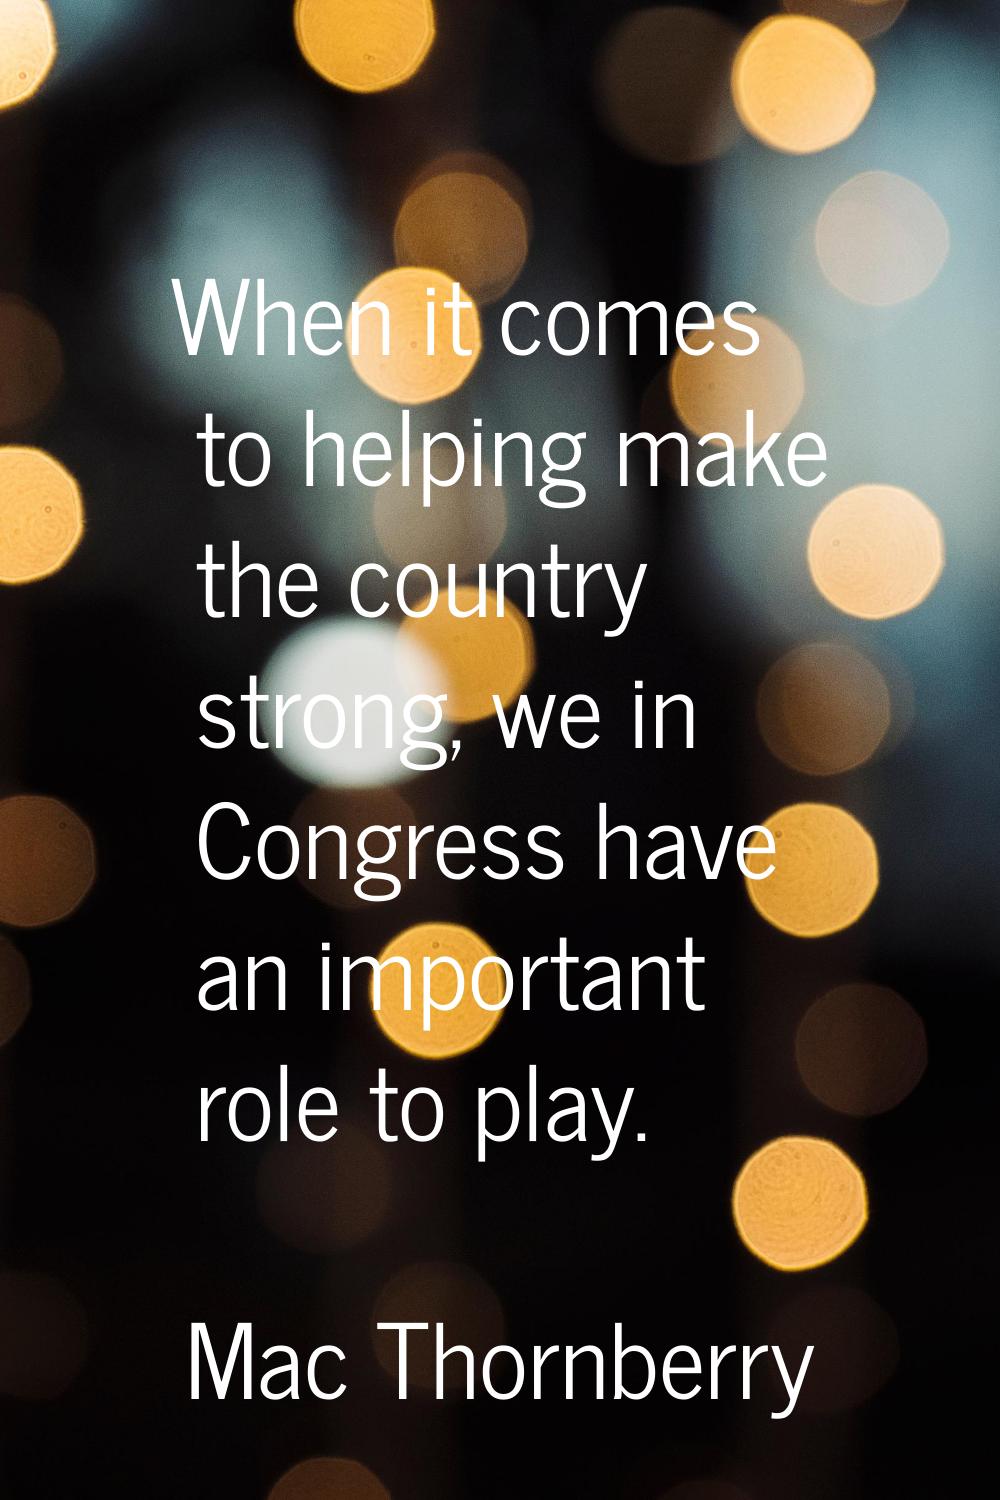 When it comes to helping make the country strong, we in Congress have an important role to play.